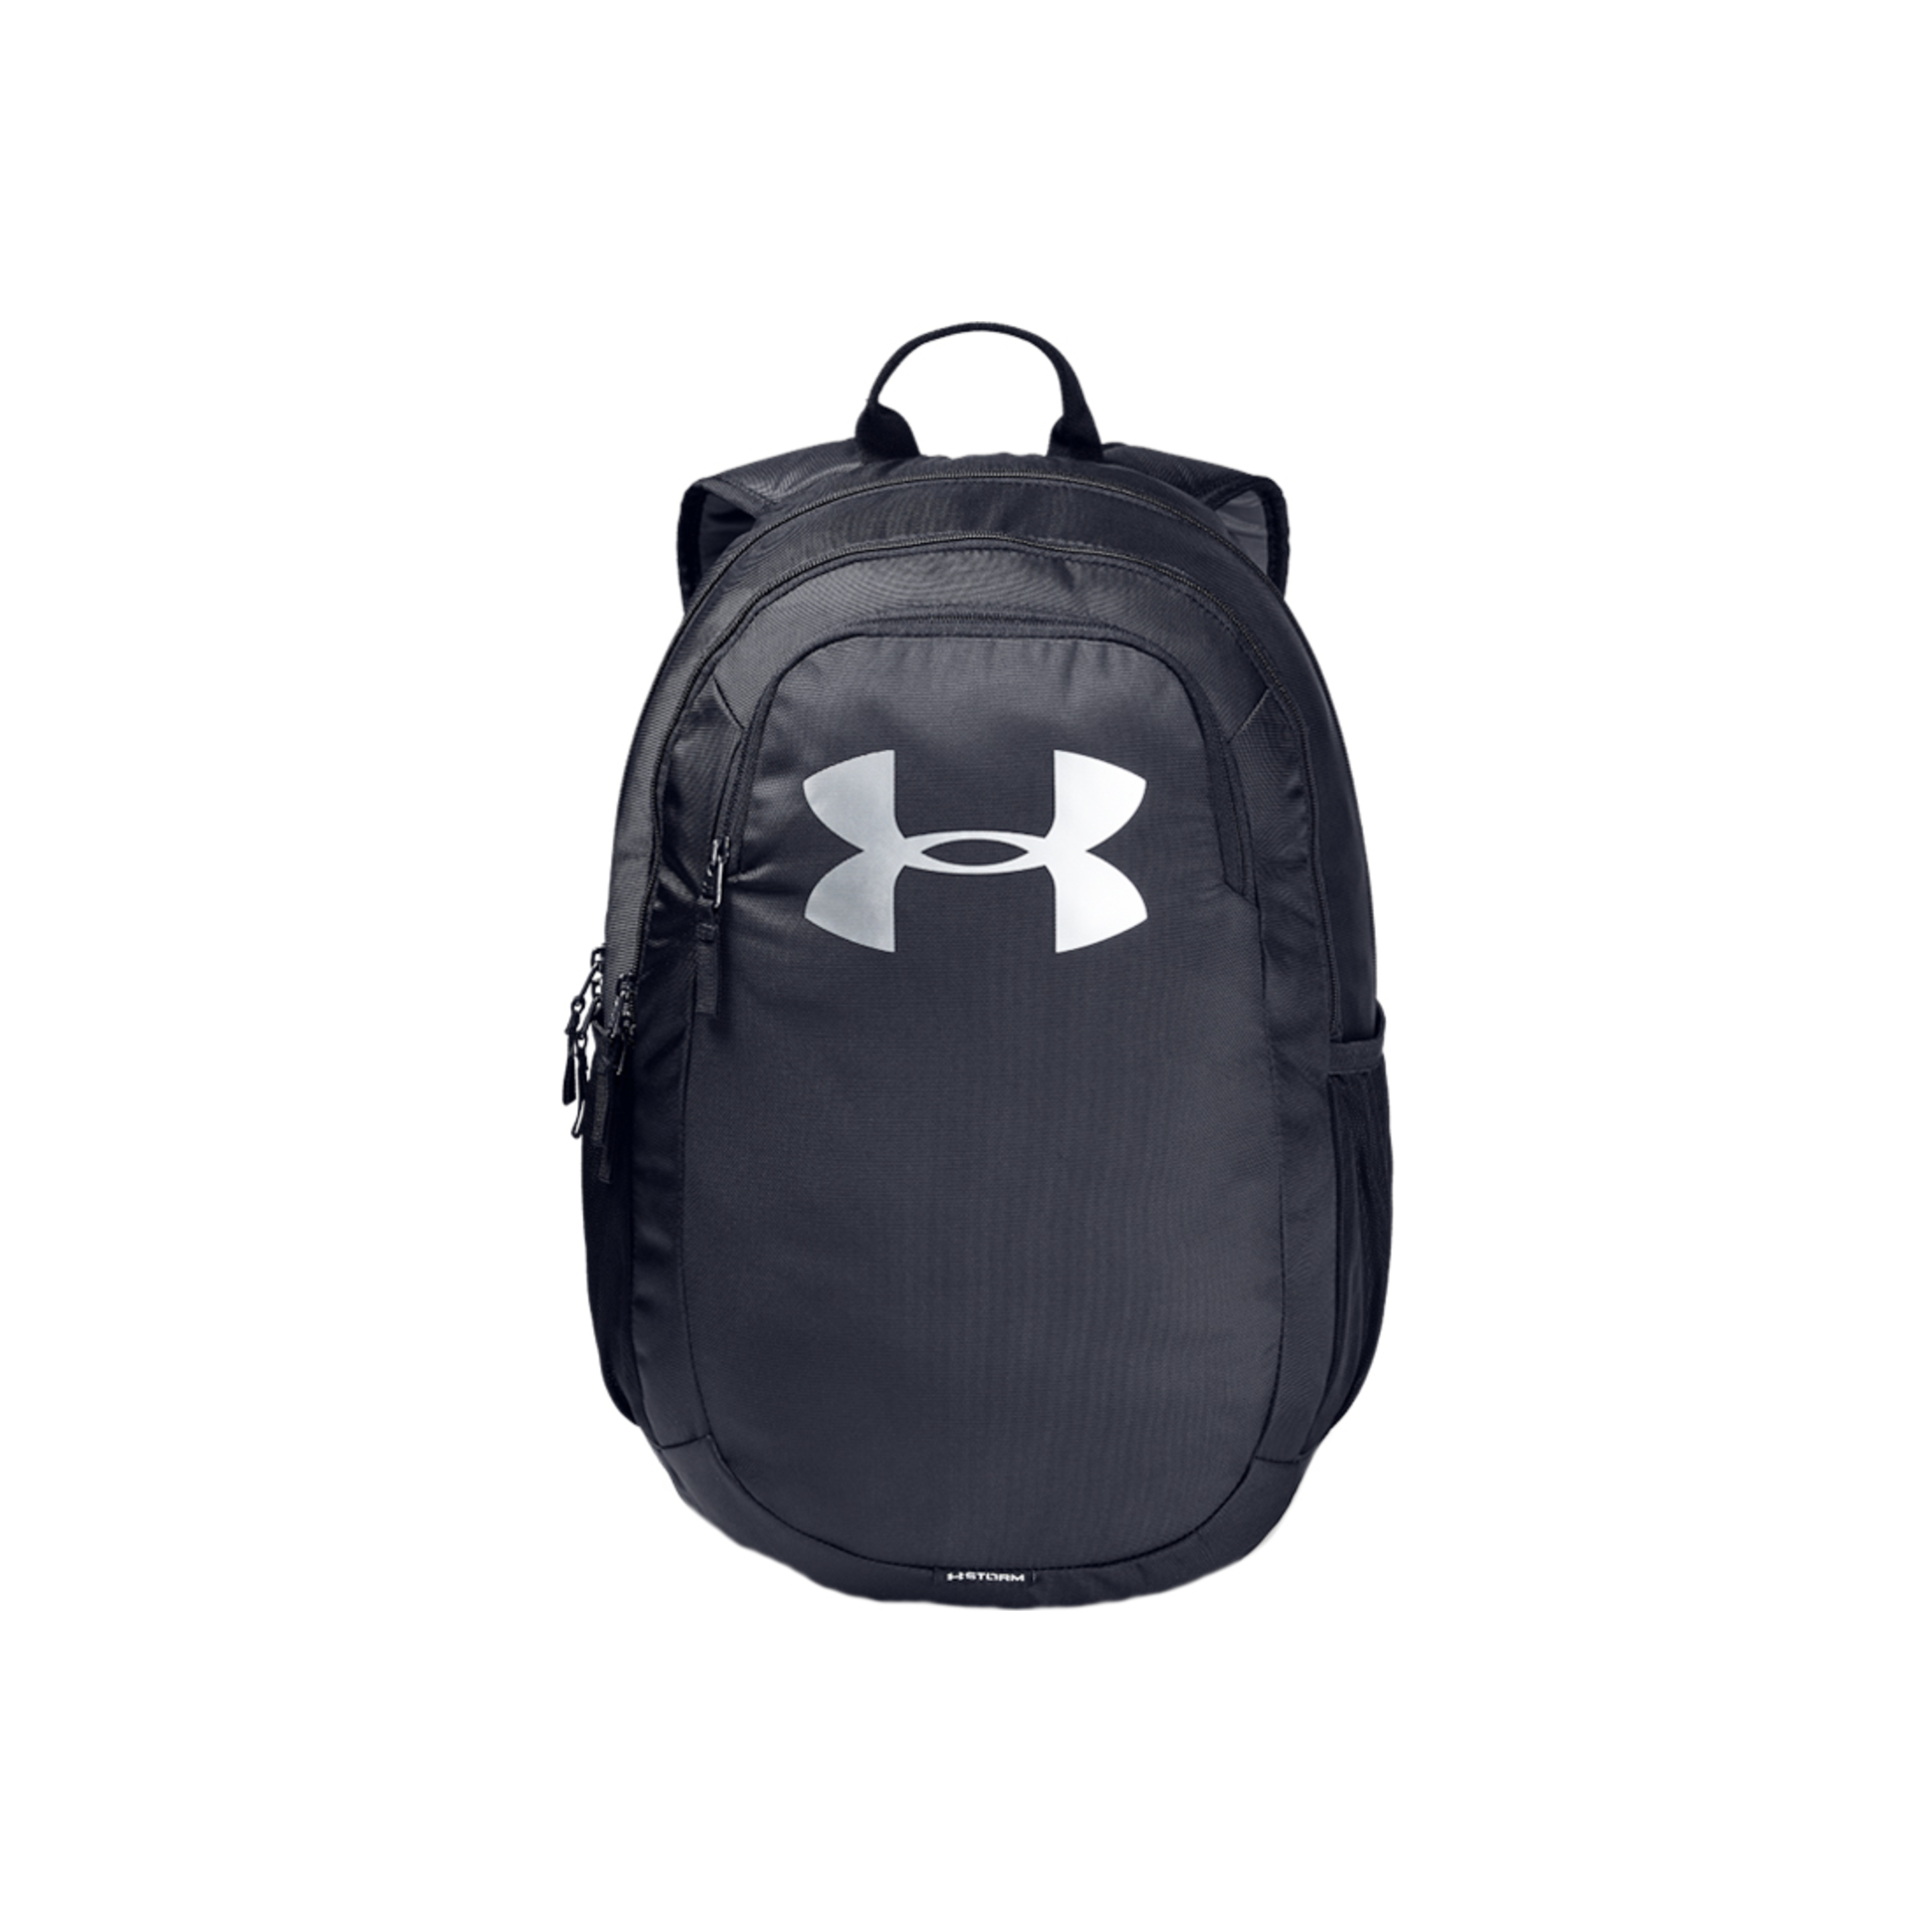 Under Armour Scrimmage 2.0 Backpack 1342652-001